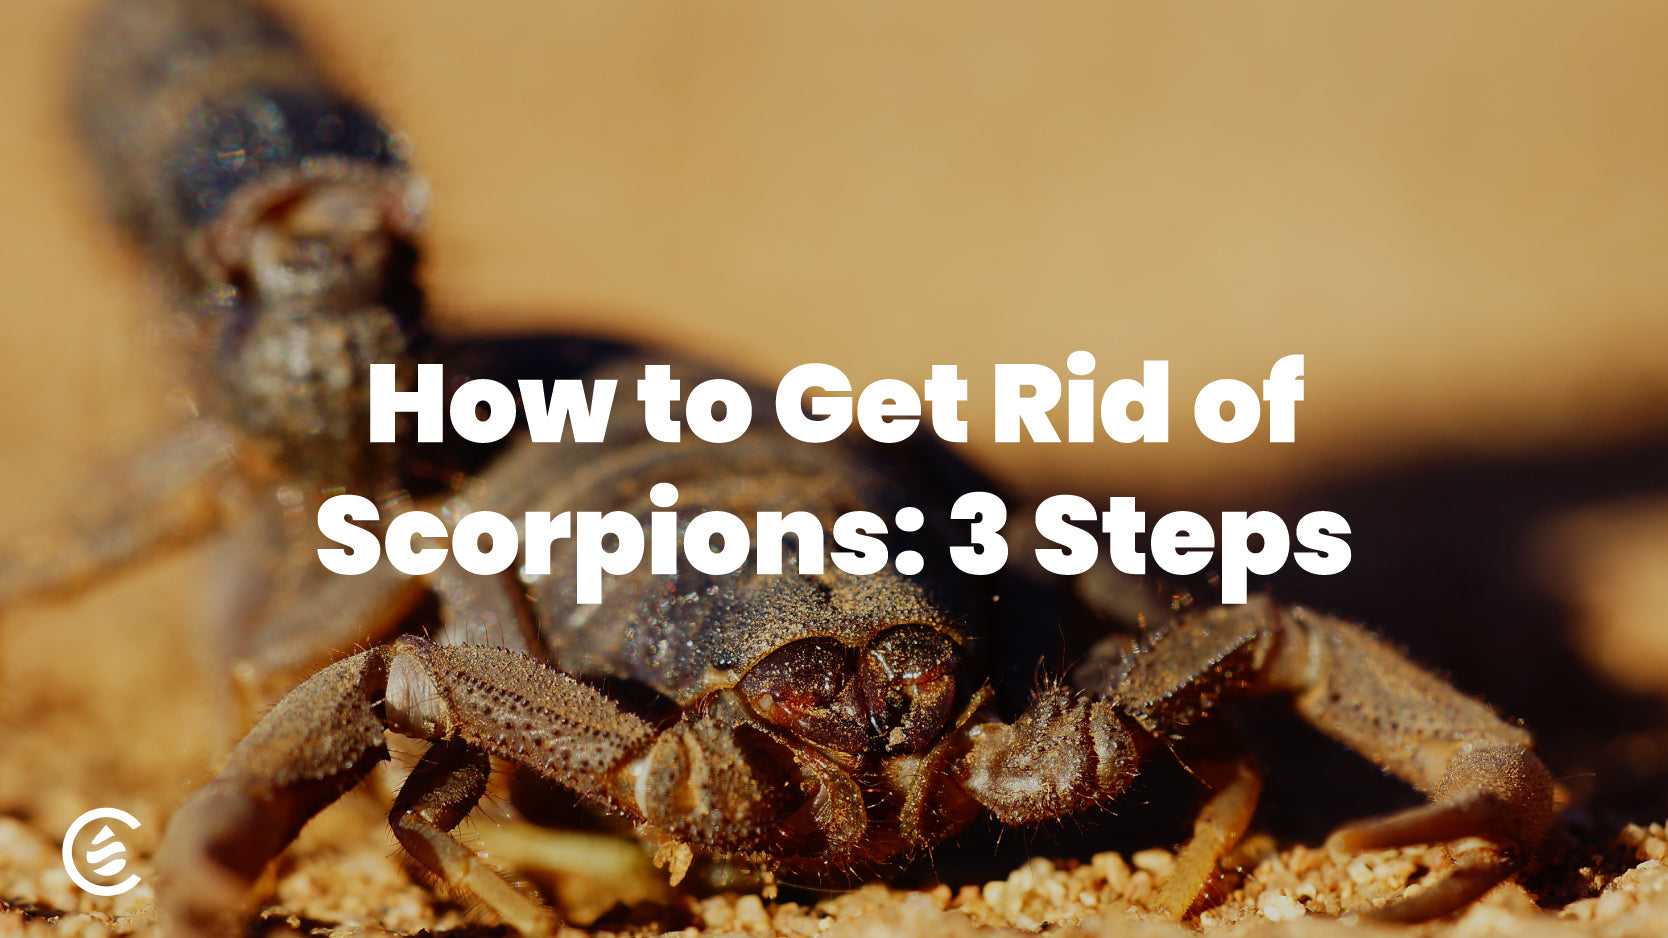 How to Get Rid of Scorpions, with Cedarcide